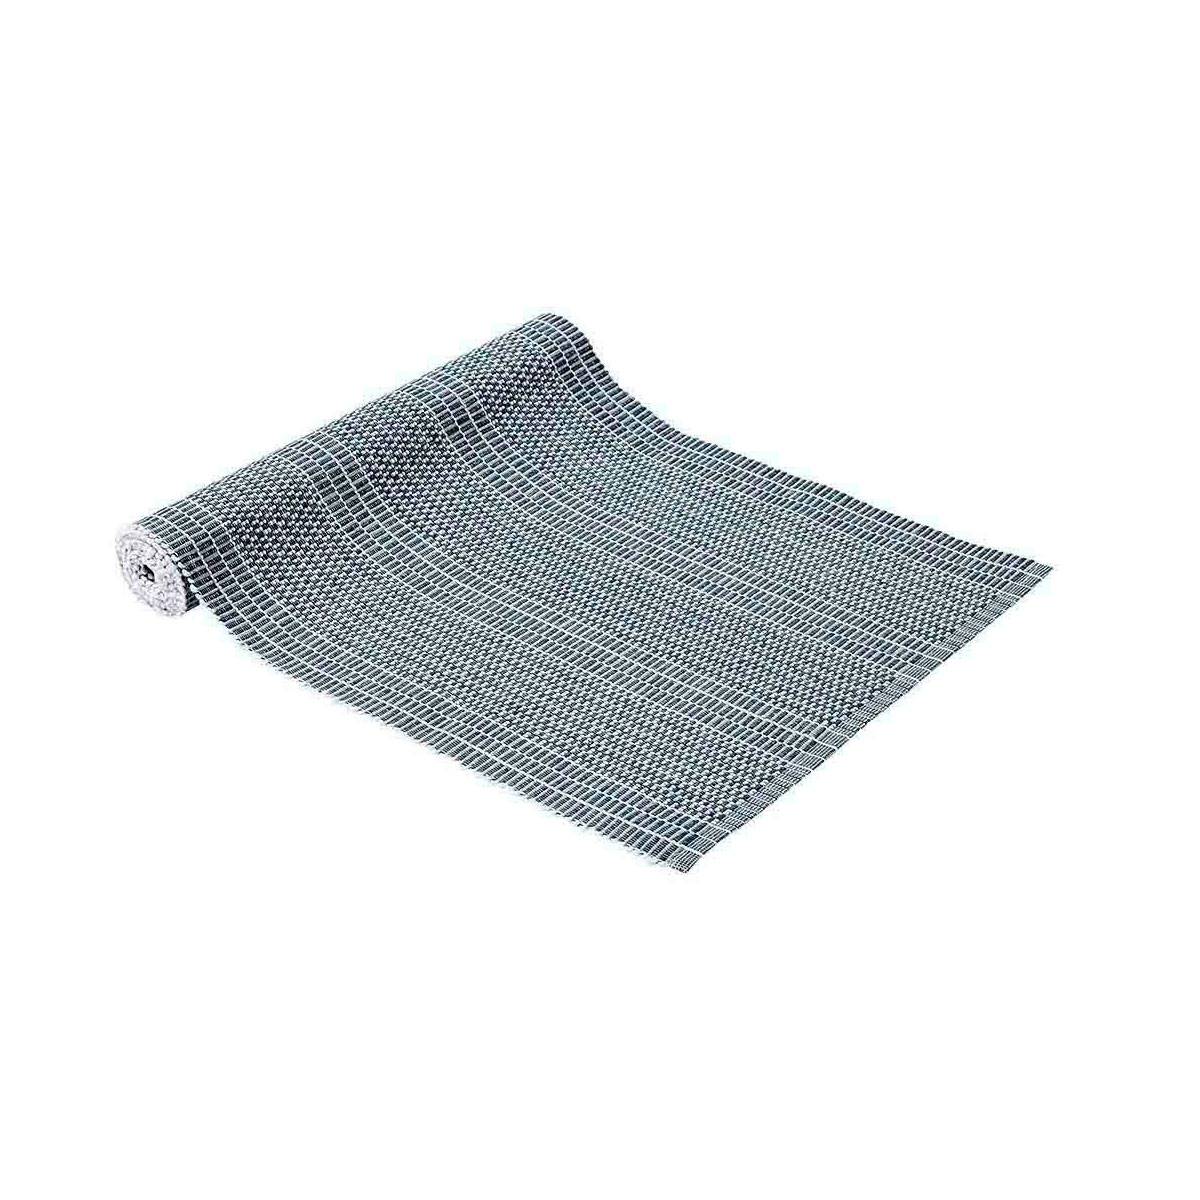 Ladelle Repose Ribbed 100% Cotton Table Runner